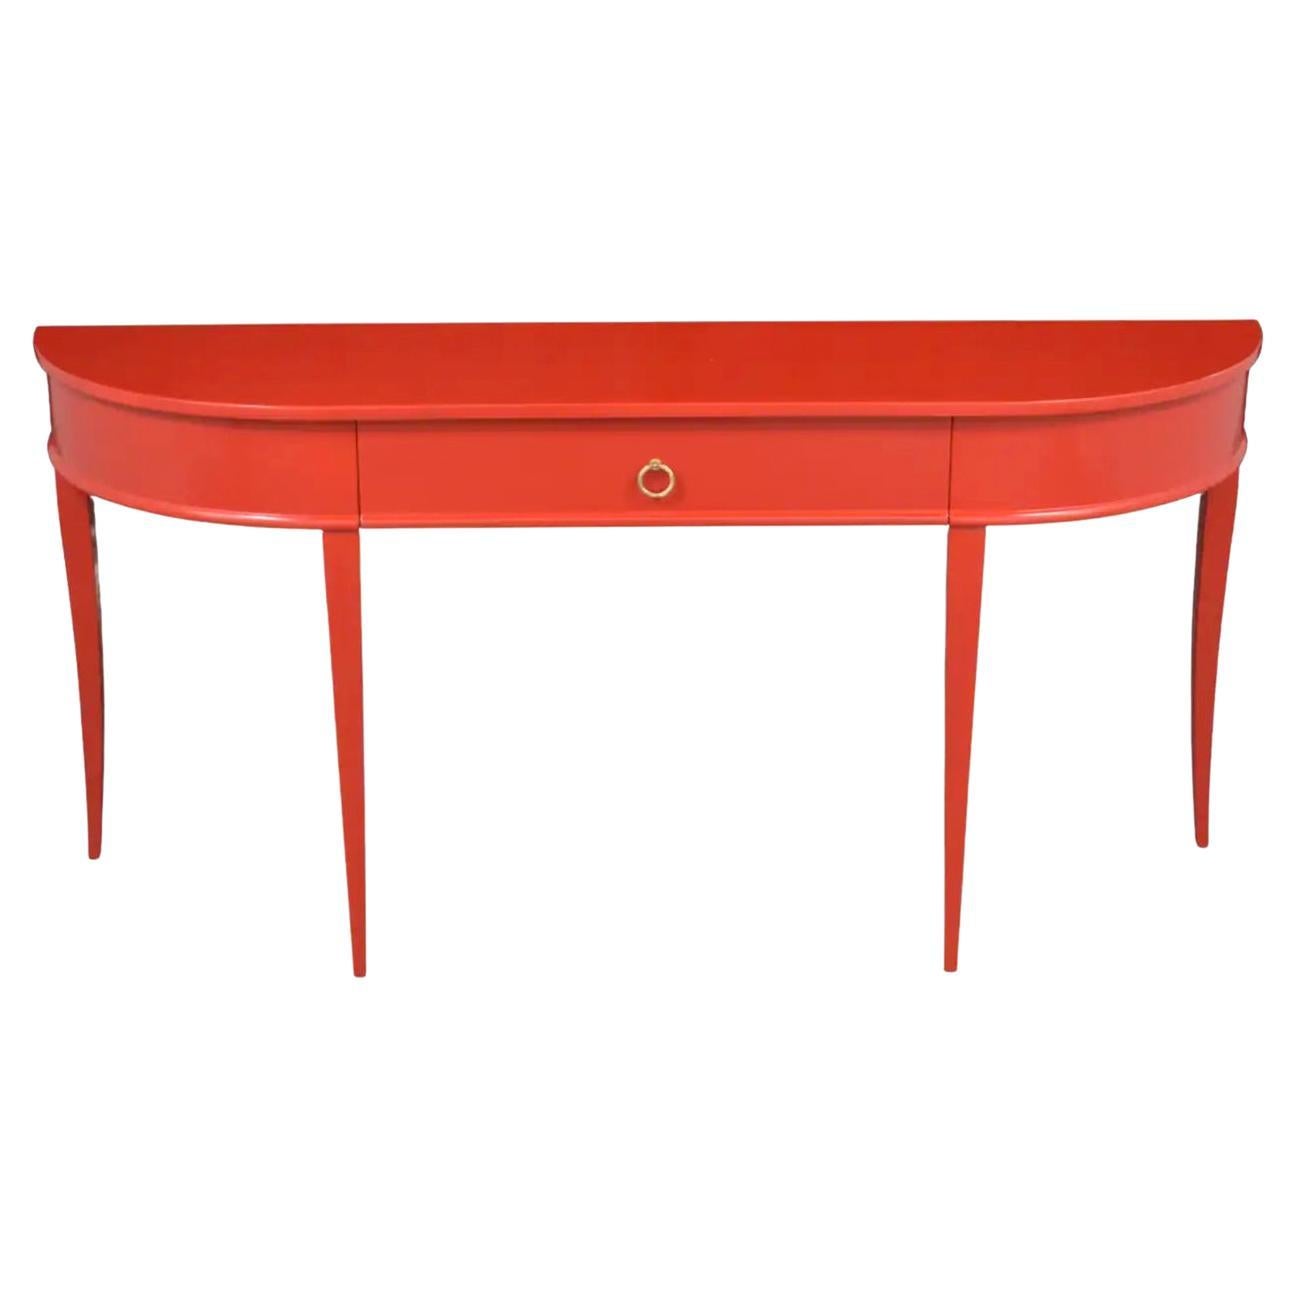 1970s Red Lacquer Console Table